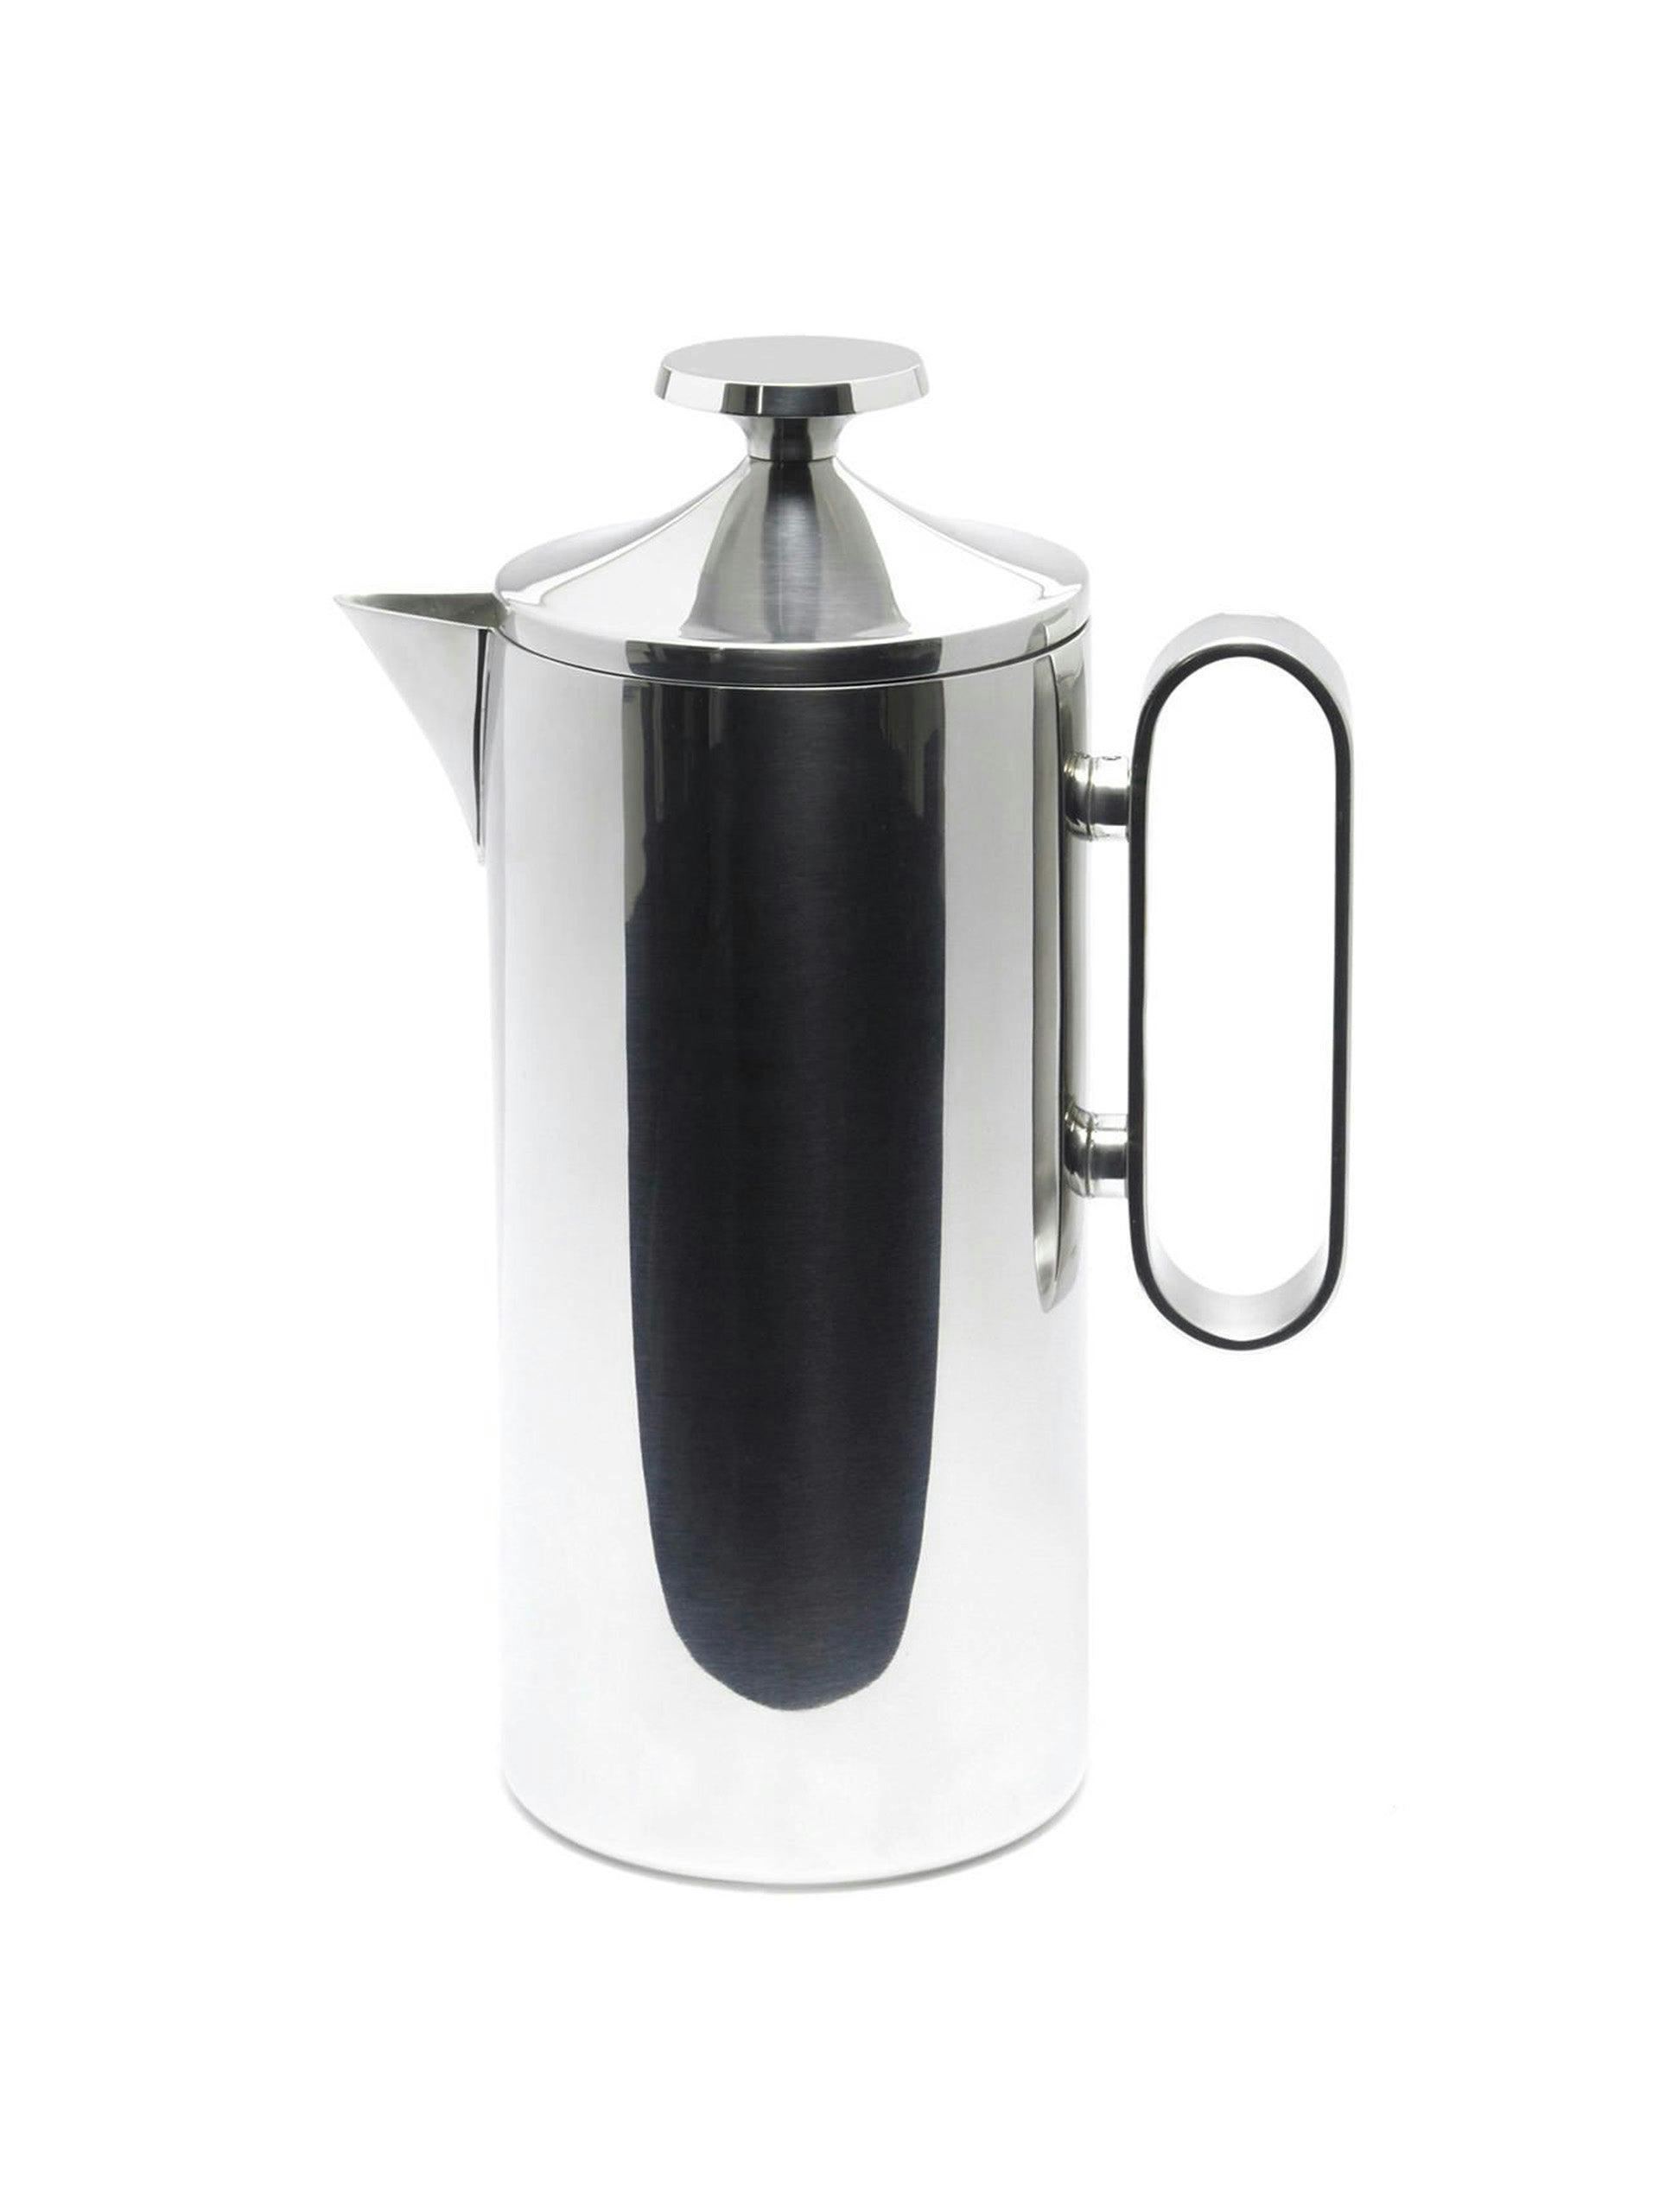 Stainless steel cafetière